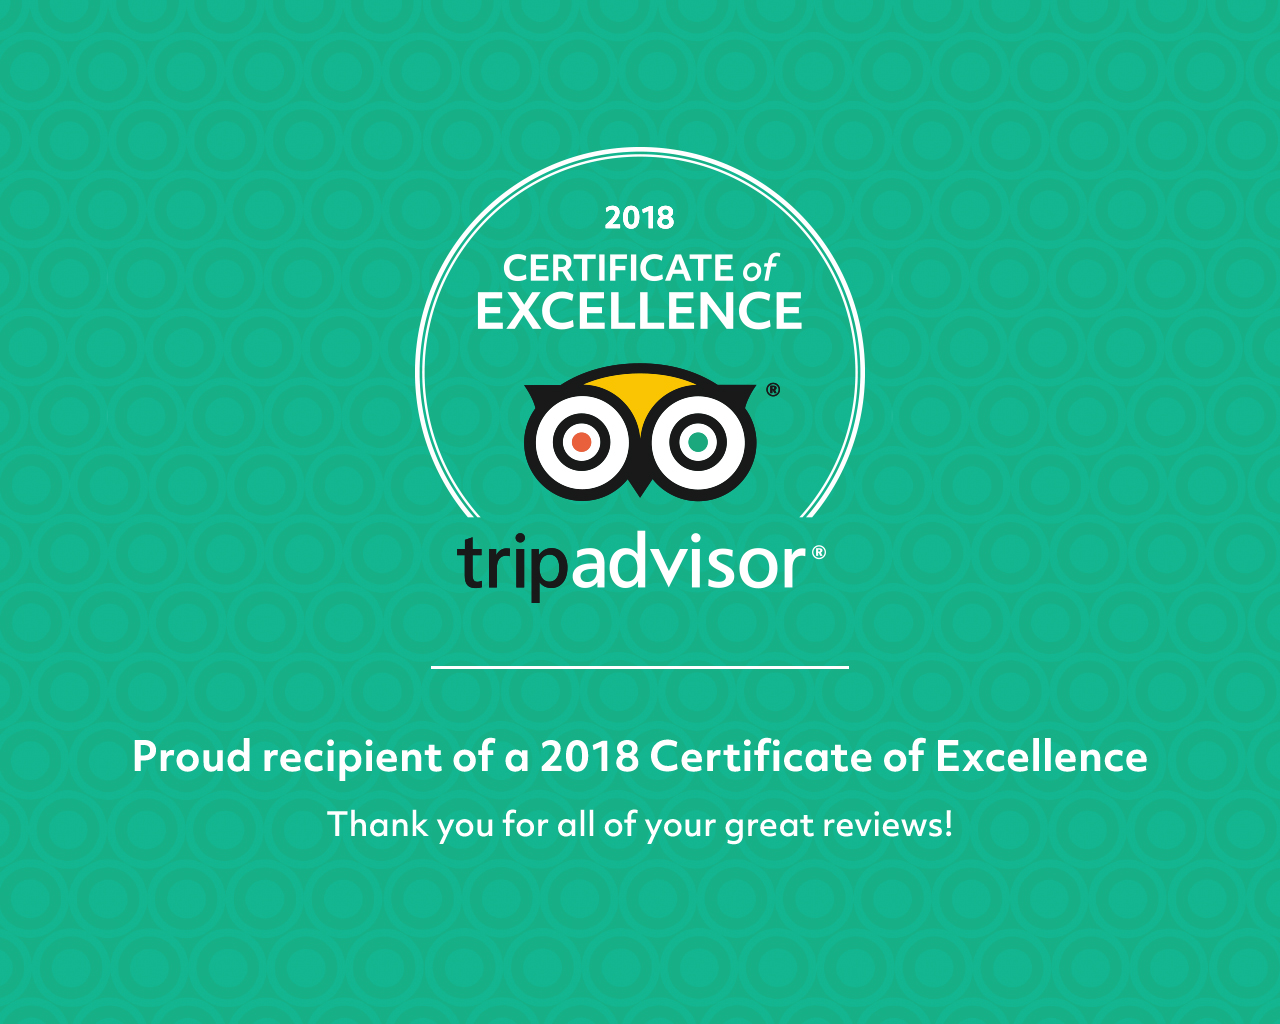 HaB Korea earned a Certificate of Excellence 2018